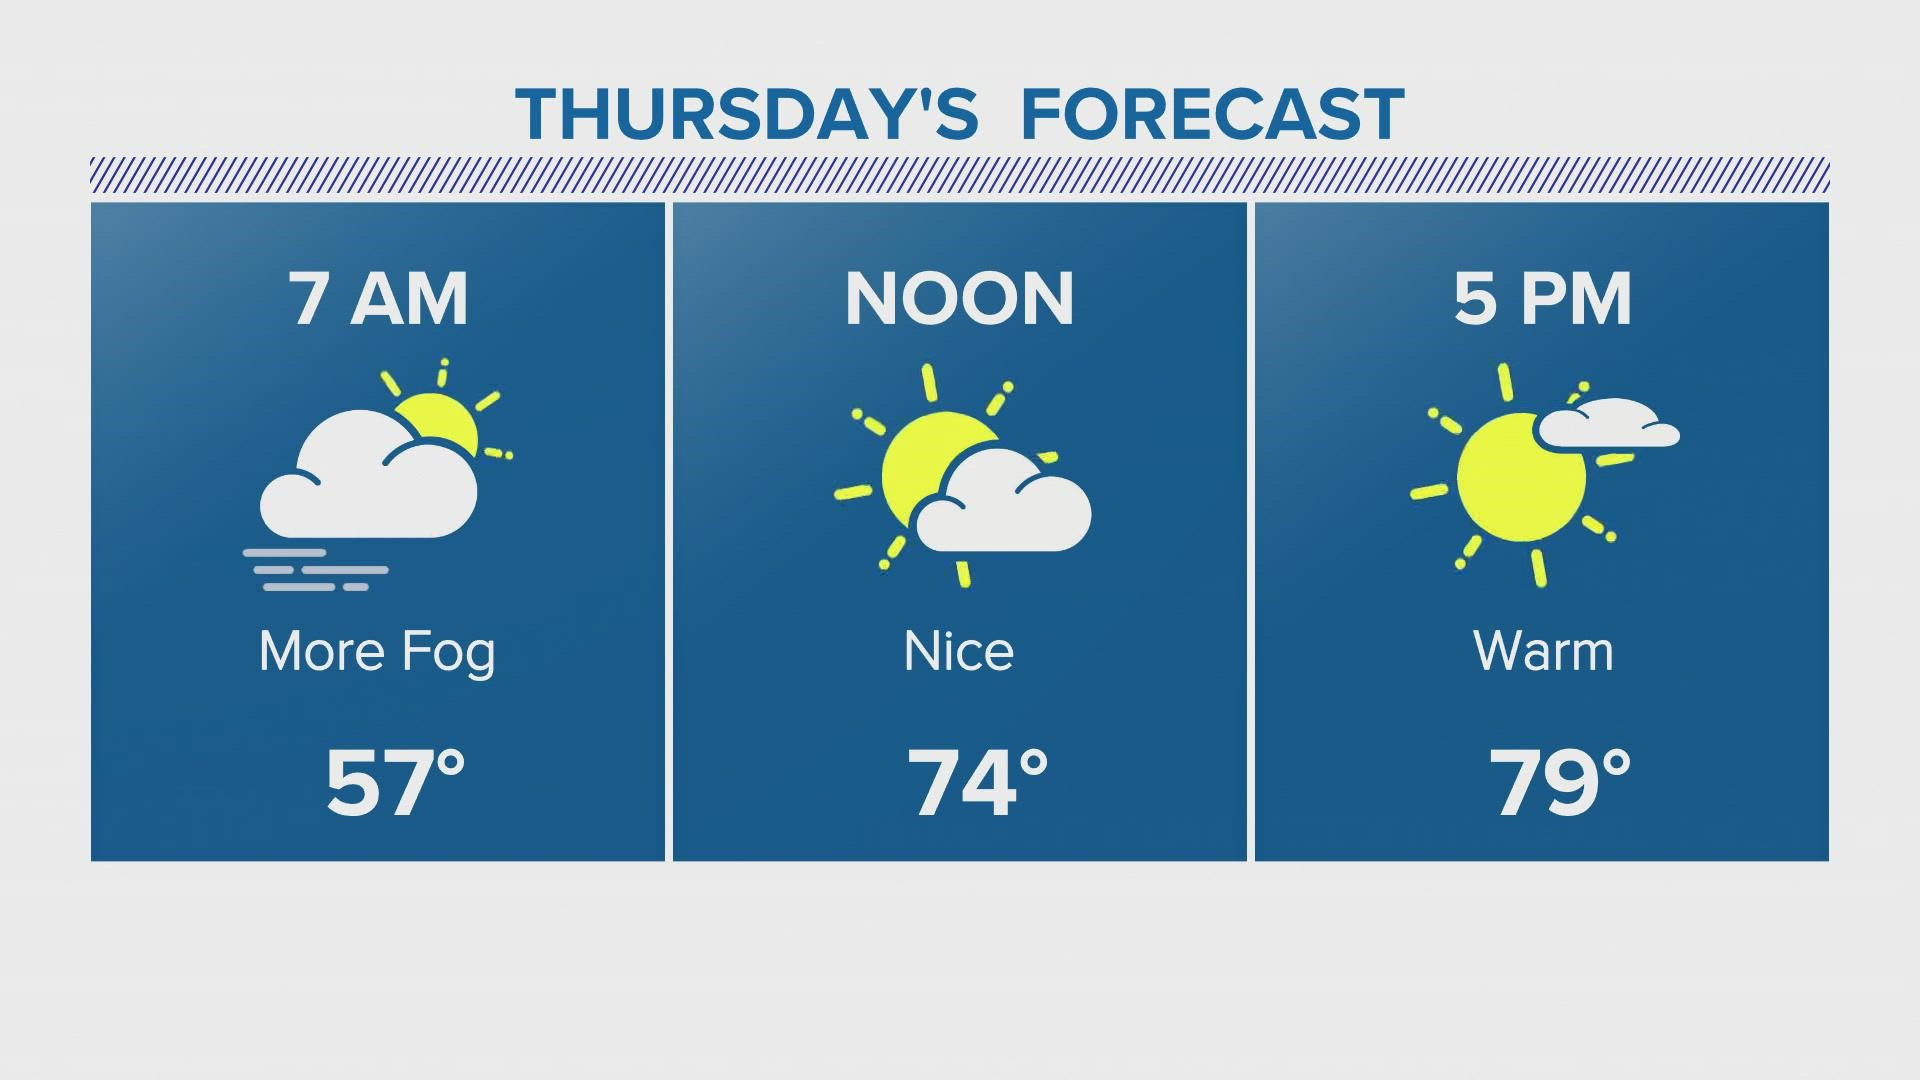 Could be a foggy morning Thursday as the unseasonably warm weather continues.